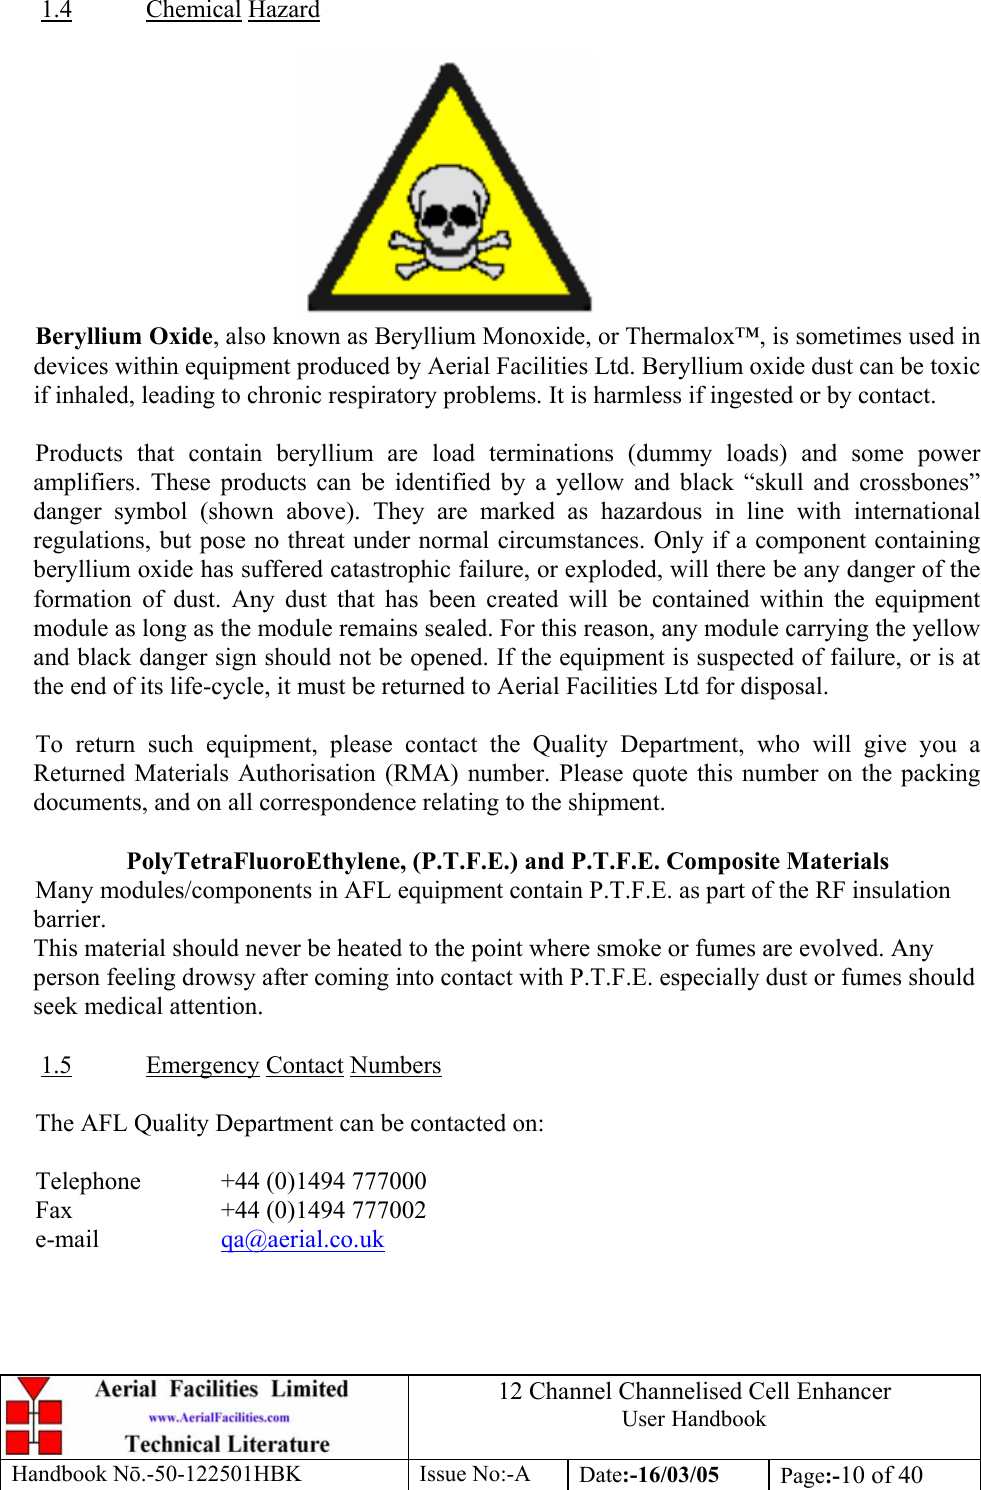 12 Channel Channelised Cell Enhancer User Handbook Handbook N.-50-122501HBK Issue No:-A Date:-16/03/05  Page:-10 of 40   1.4 Chemical Hazard   Beryllium Oxide, also known as Beryllium Monoxide, or Thermalox™, is sometimes used in devices within equipment produced by Aerial Facilities Ltd. Beryllium oxide dust can be toxic if inhaled, leading to chronic respiratory problems. It is harmless if ingested or by contact.  Products that contain beryllium are load terminations (dummy loads) and some power amplifiers. These products can be identified by a yellow and black “skull and crossbones” danger symbol (shown above). They are marked as hazardous in line with international regulations, but pose no threat under normal circumstances. Only if a component containing beryllium oxide has suffered catastrophic failure, or exploded, will there be any danger of the formation of dust. Any dust that has been created will be contained within the equipment module as long as the module remains sealed. For this reason, any module carrying the yellow and black danger sign should not be opened. If the equipment is suspected of failure, or is at the end of its life-cycle, it must be returned to Aerial Facilities Ltd for disposal.  To return such equipment, please contact the Quality Department, who will give you a Returned Materials Authorisation (RMA) number. Please quote this number on the packing documents, and on all correspondence relating to the shipment.  PolyTetraFluoroEthylene, (P.T.F.E.) and P.T.F.E. Composite Materials Many modules/components in AFL equipment contain P.T.F.E. as part of the RF insulation barrier. This material should never be heated to the point where smoke or fumes are evolved. Any person feeling drowsy after coming into contact with P.T.F.E. especially dust or fumes should seek medical attention.  1.5 Emergency Contact Numbers  The AFL Quality Department can be contacted on:  Telephone   +44 (0)1494 777000 Fax    +44 (0)1494 777002 e-mail   qa@aerial.co.uk  